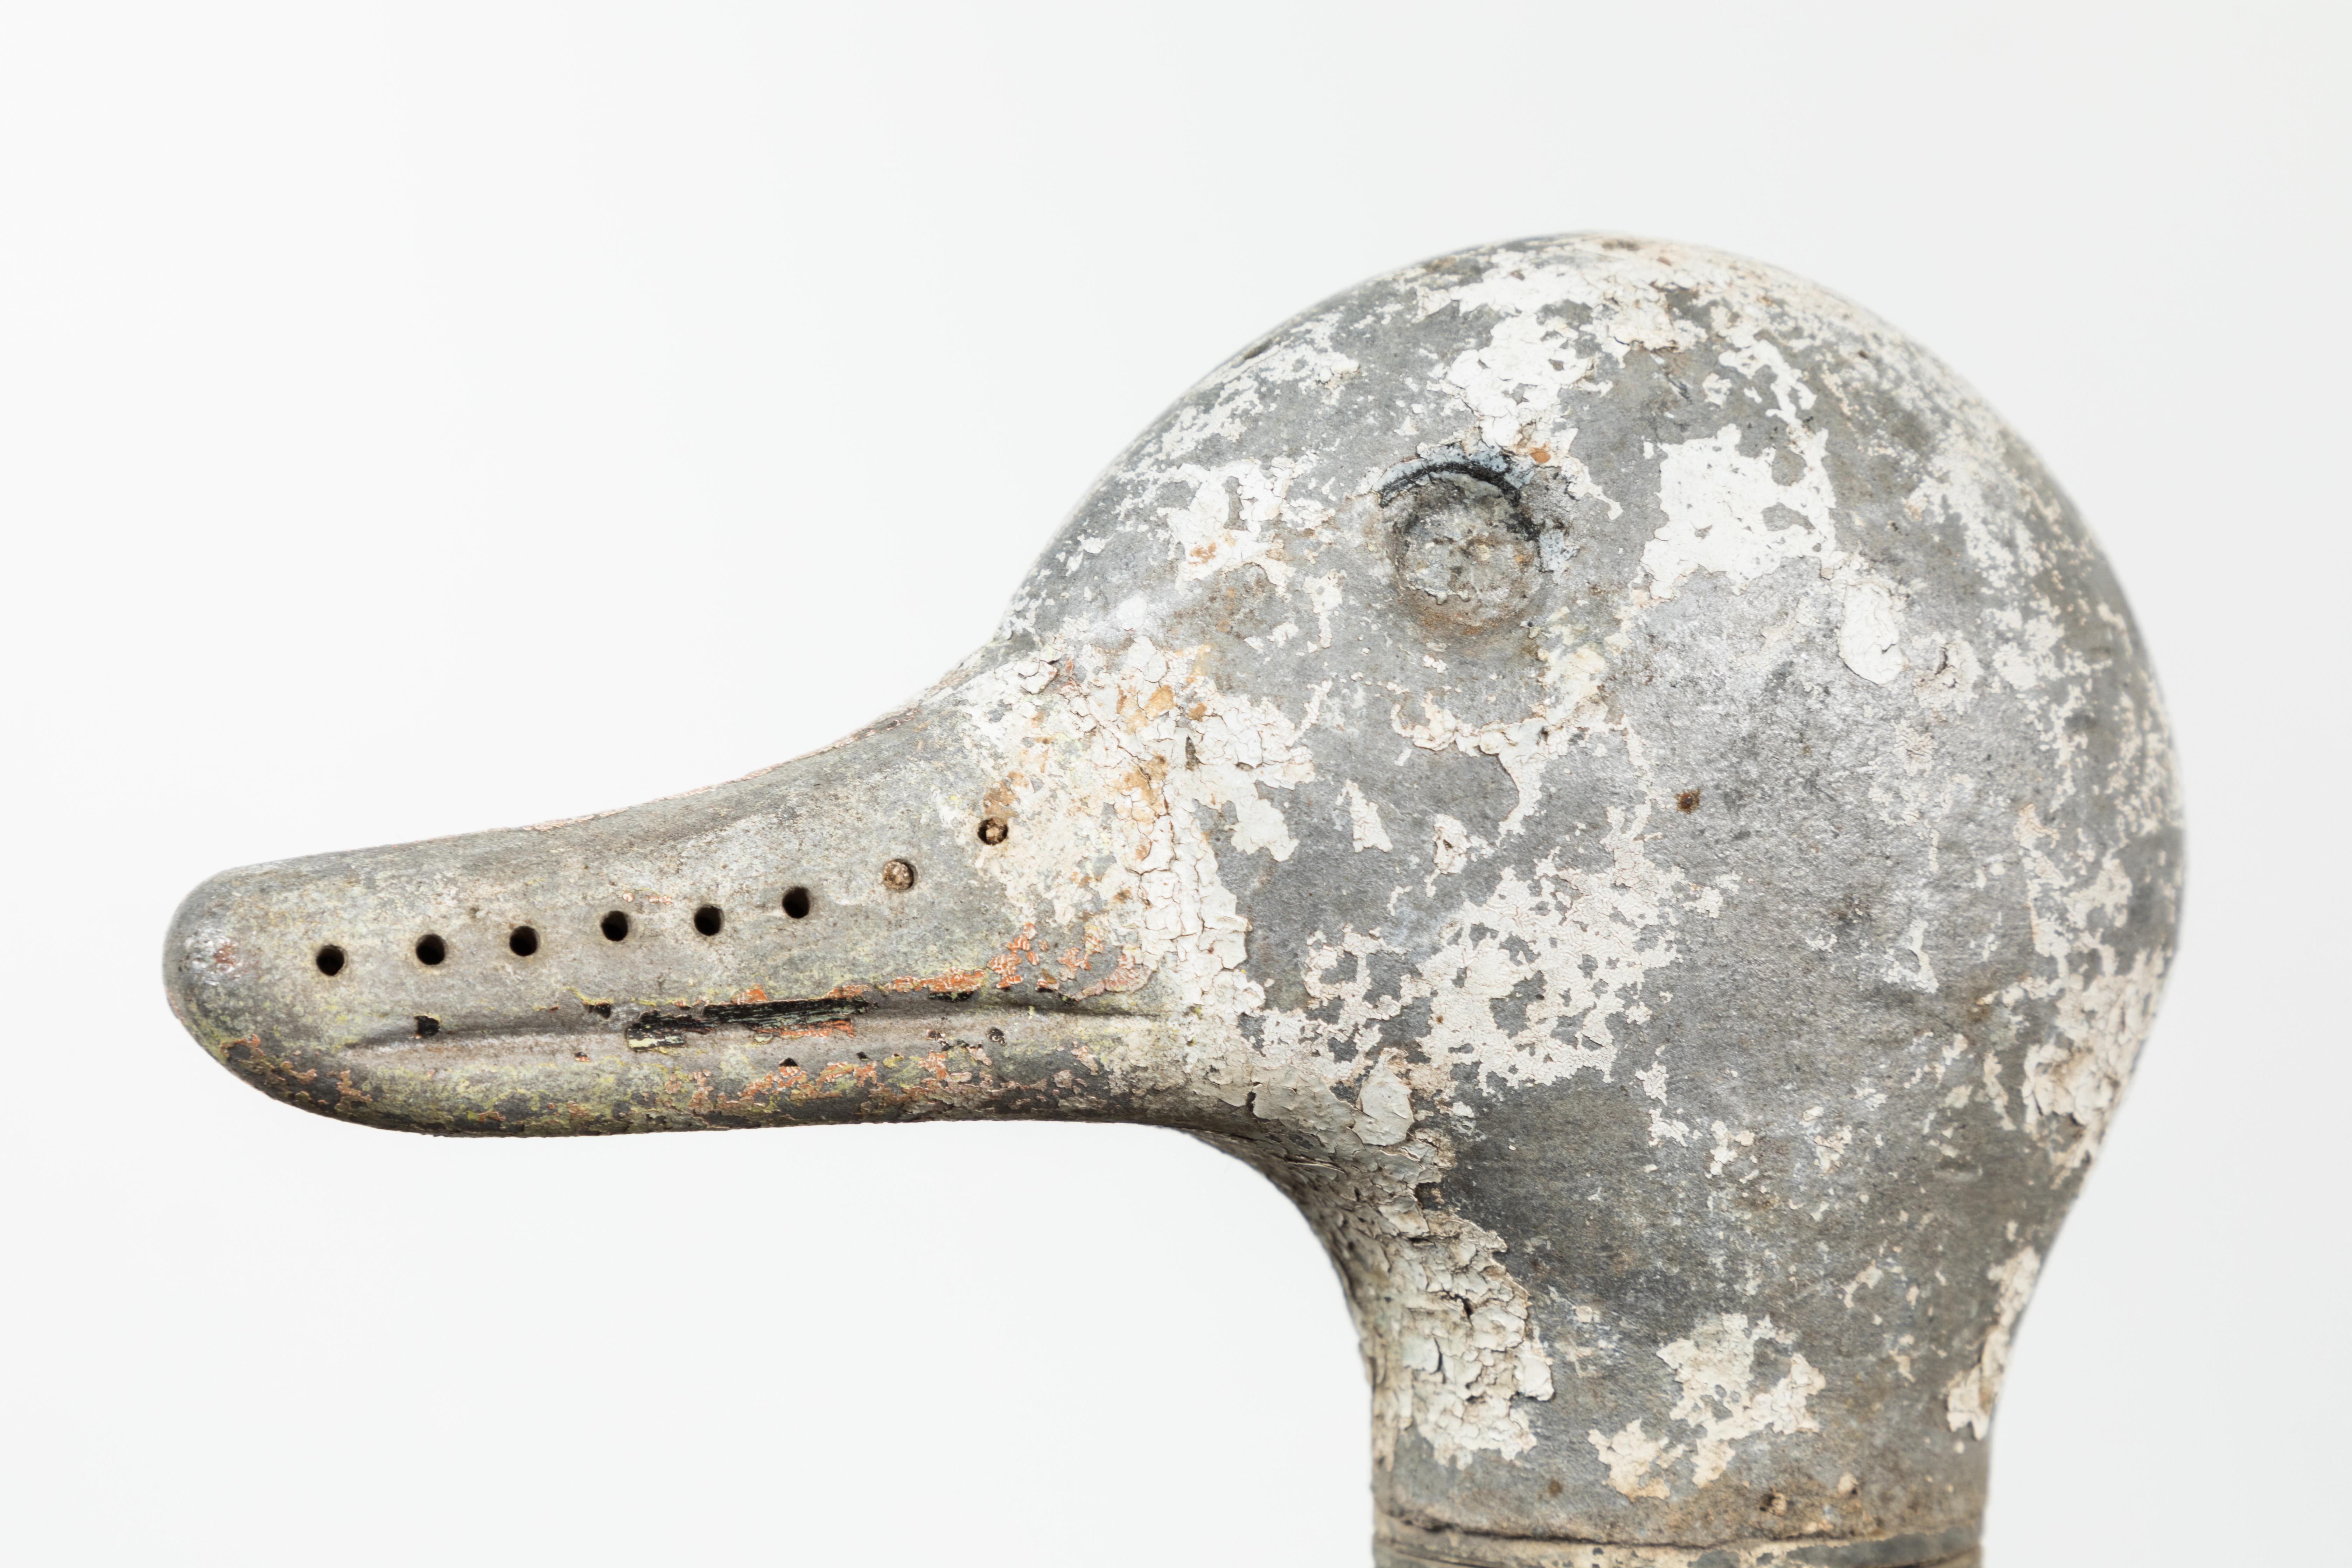 Fun vintage iron duck sprinkler. The head of this circa 1940s duck lawn sprinkler would spin as the water would shoot from holes along the top of the head and the beak.